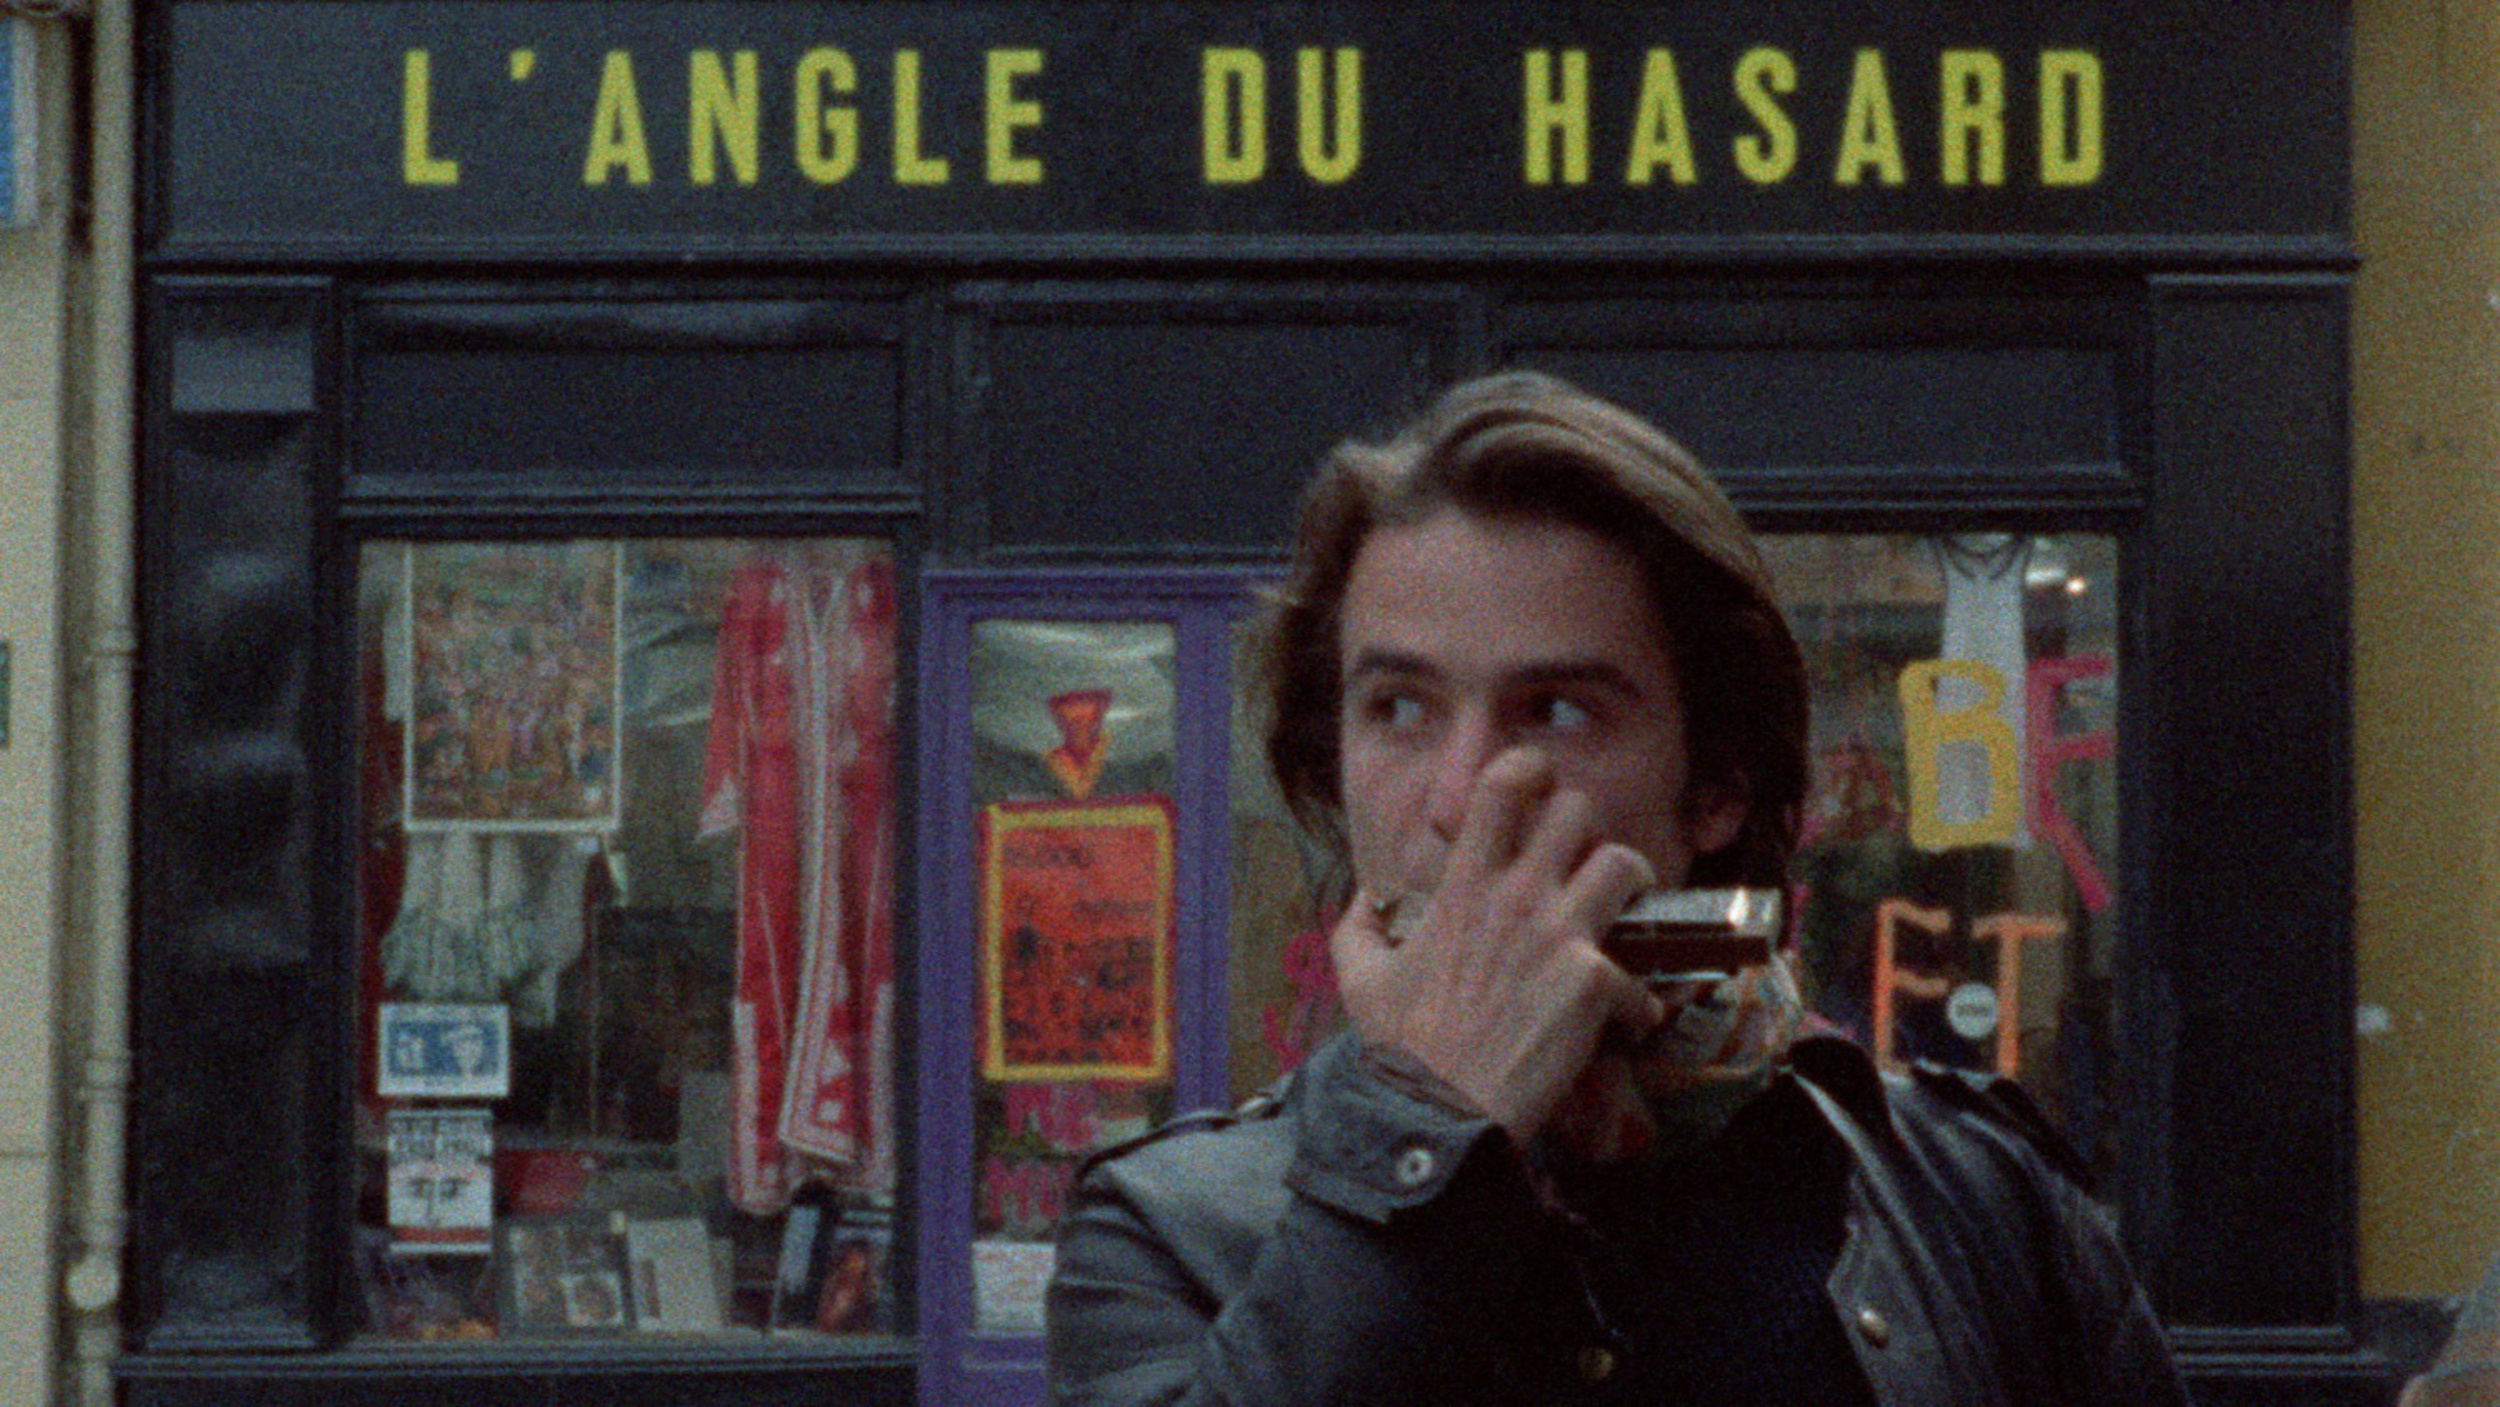 <p>You can opt to view Jacques Rivette’s 12-hour magnum opus in three-hour chunks, or, if you want to do the late, great New Wave filmmaker proud, you can steel yourself for one daring sit on Fandor (available via Amazon Prime) and try to make sense of the wild, Pynchon-esque narrative all at once. Or you could watch Rivette’s far more accessible “Celine and Julie Go Boating," which runs a scant 192 minutes. But in these dark, shelter-at-home days, you’ve got to go for it.</p><p><a href='https://www.msn.com/en-us/community/channel/vid-cj9pqbr0vn9in2b6ddcd8sfgpfq6x6utp44fssrv6mc2gtybw0us'>Follow us on MSN to see more of our exclusive entertainment content.</a></p>